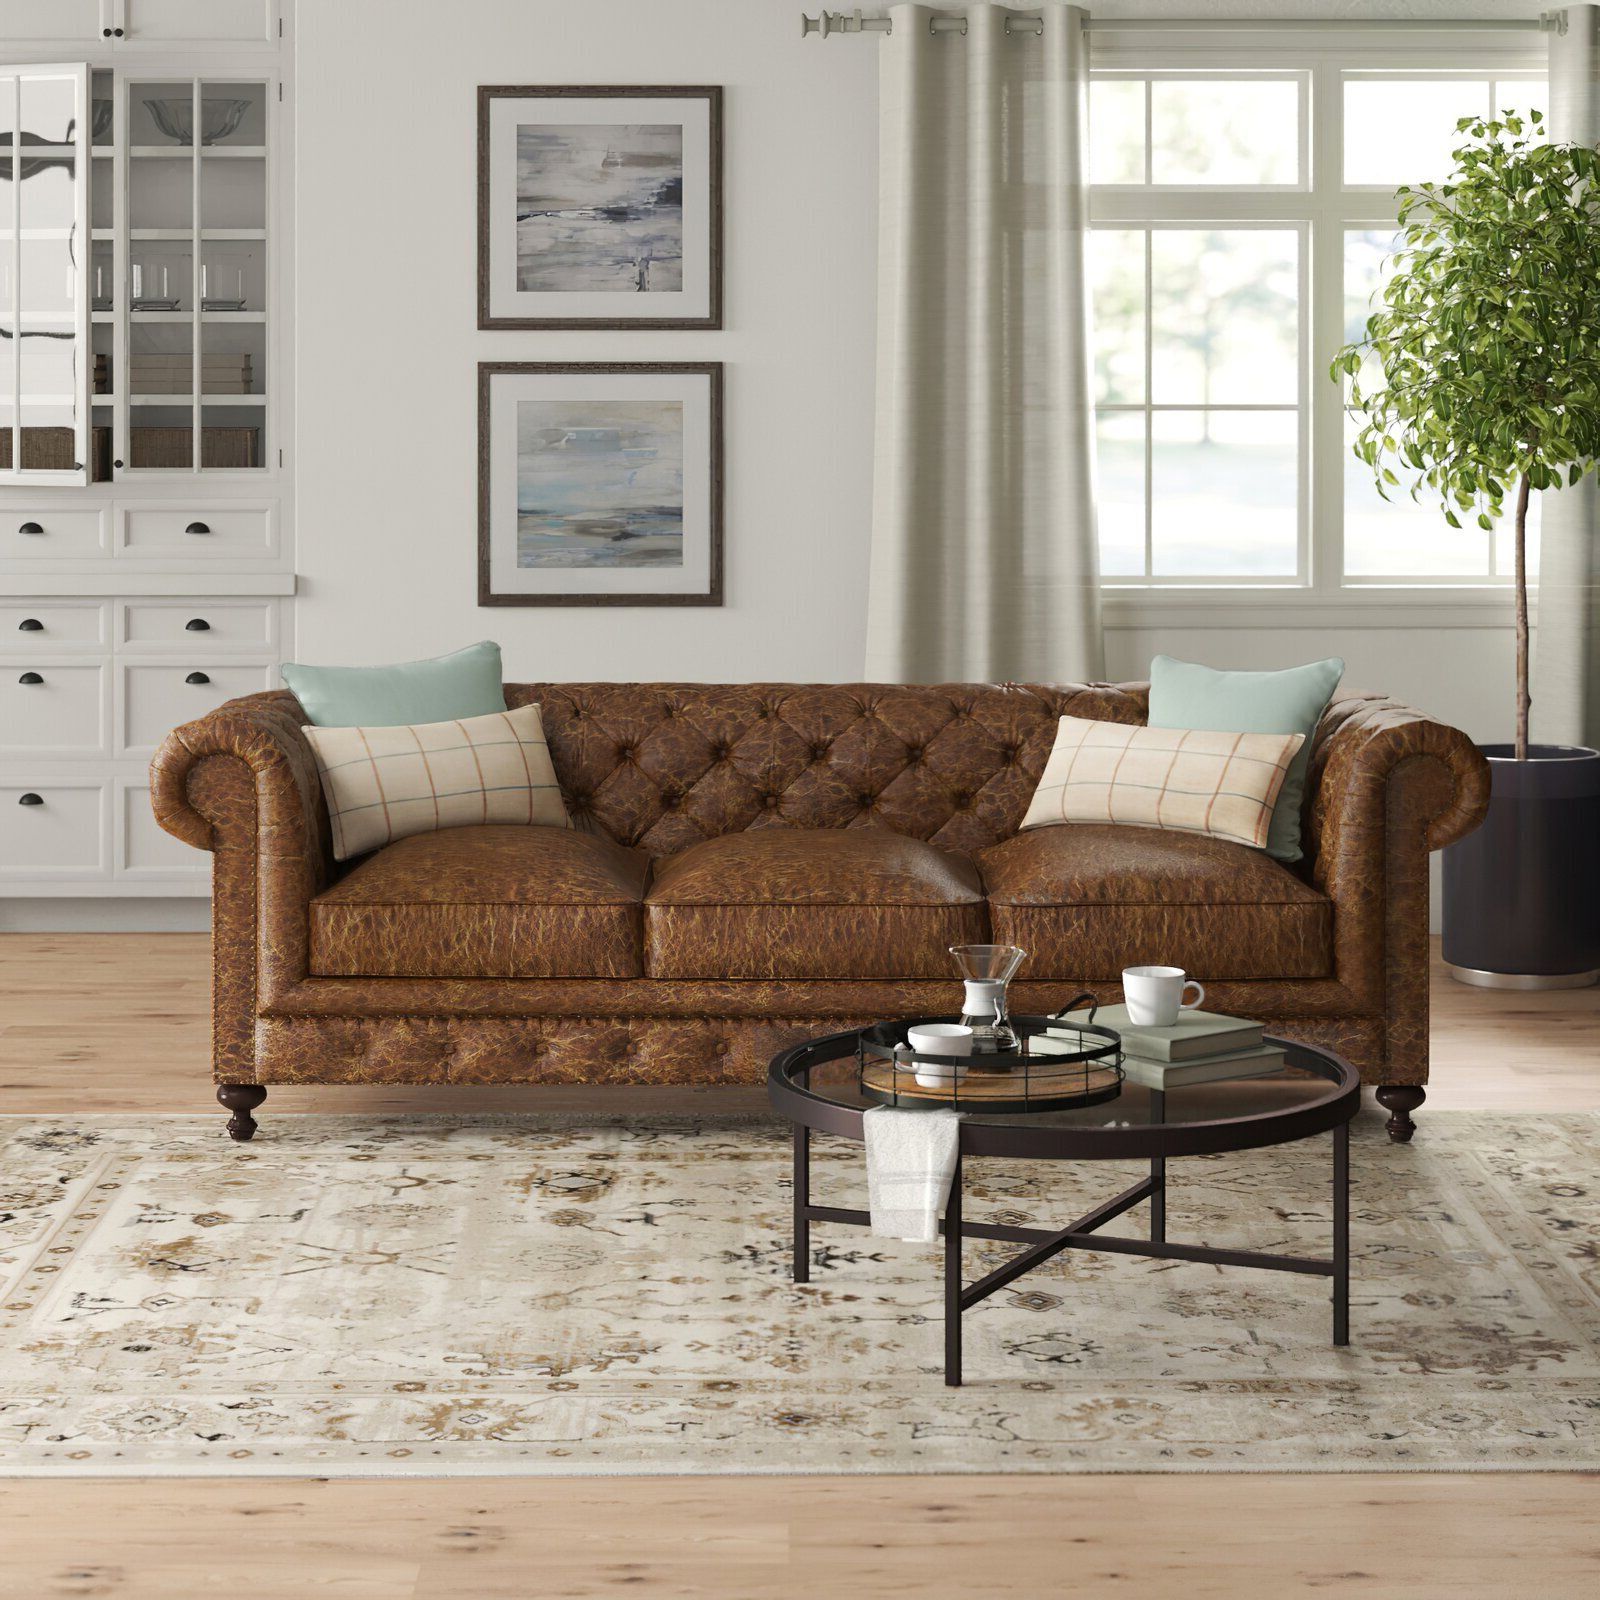 Leather Nailhead Sofas – Ideas On Foter In Sofas With Nailhead Trim (Gallery 17 of 20)